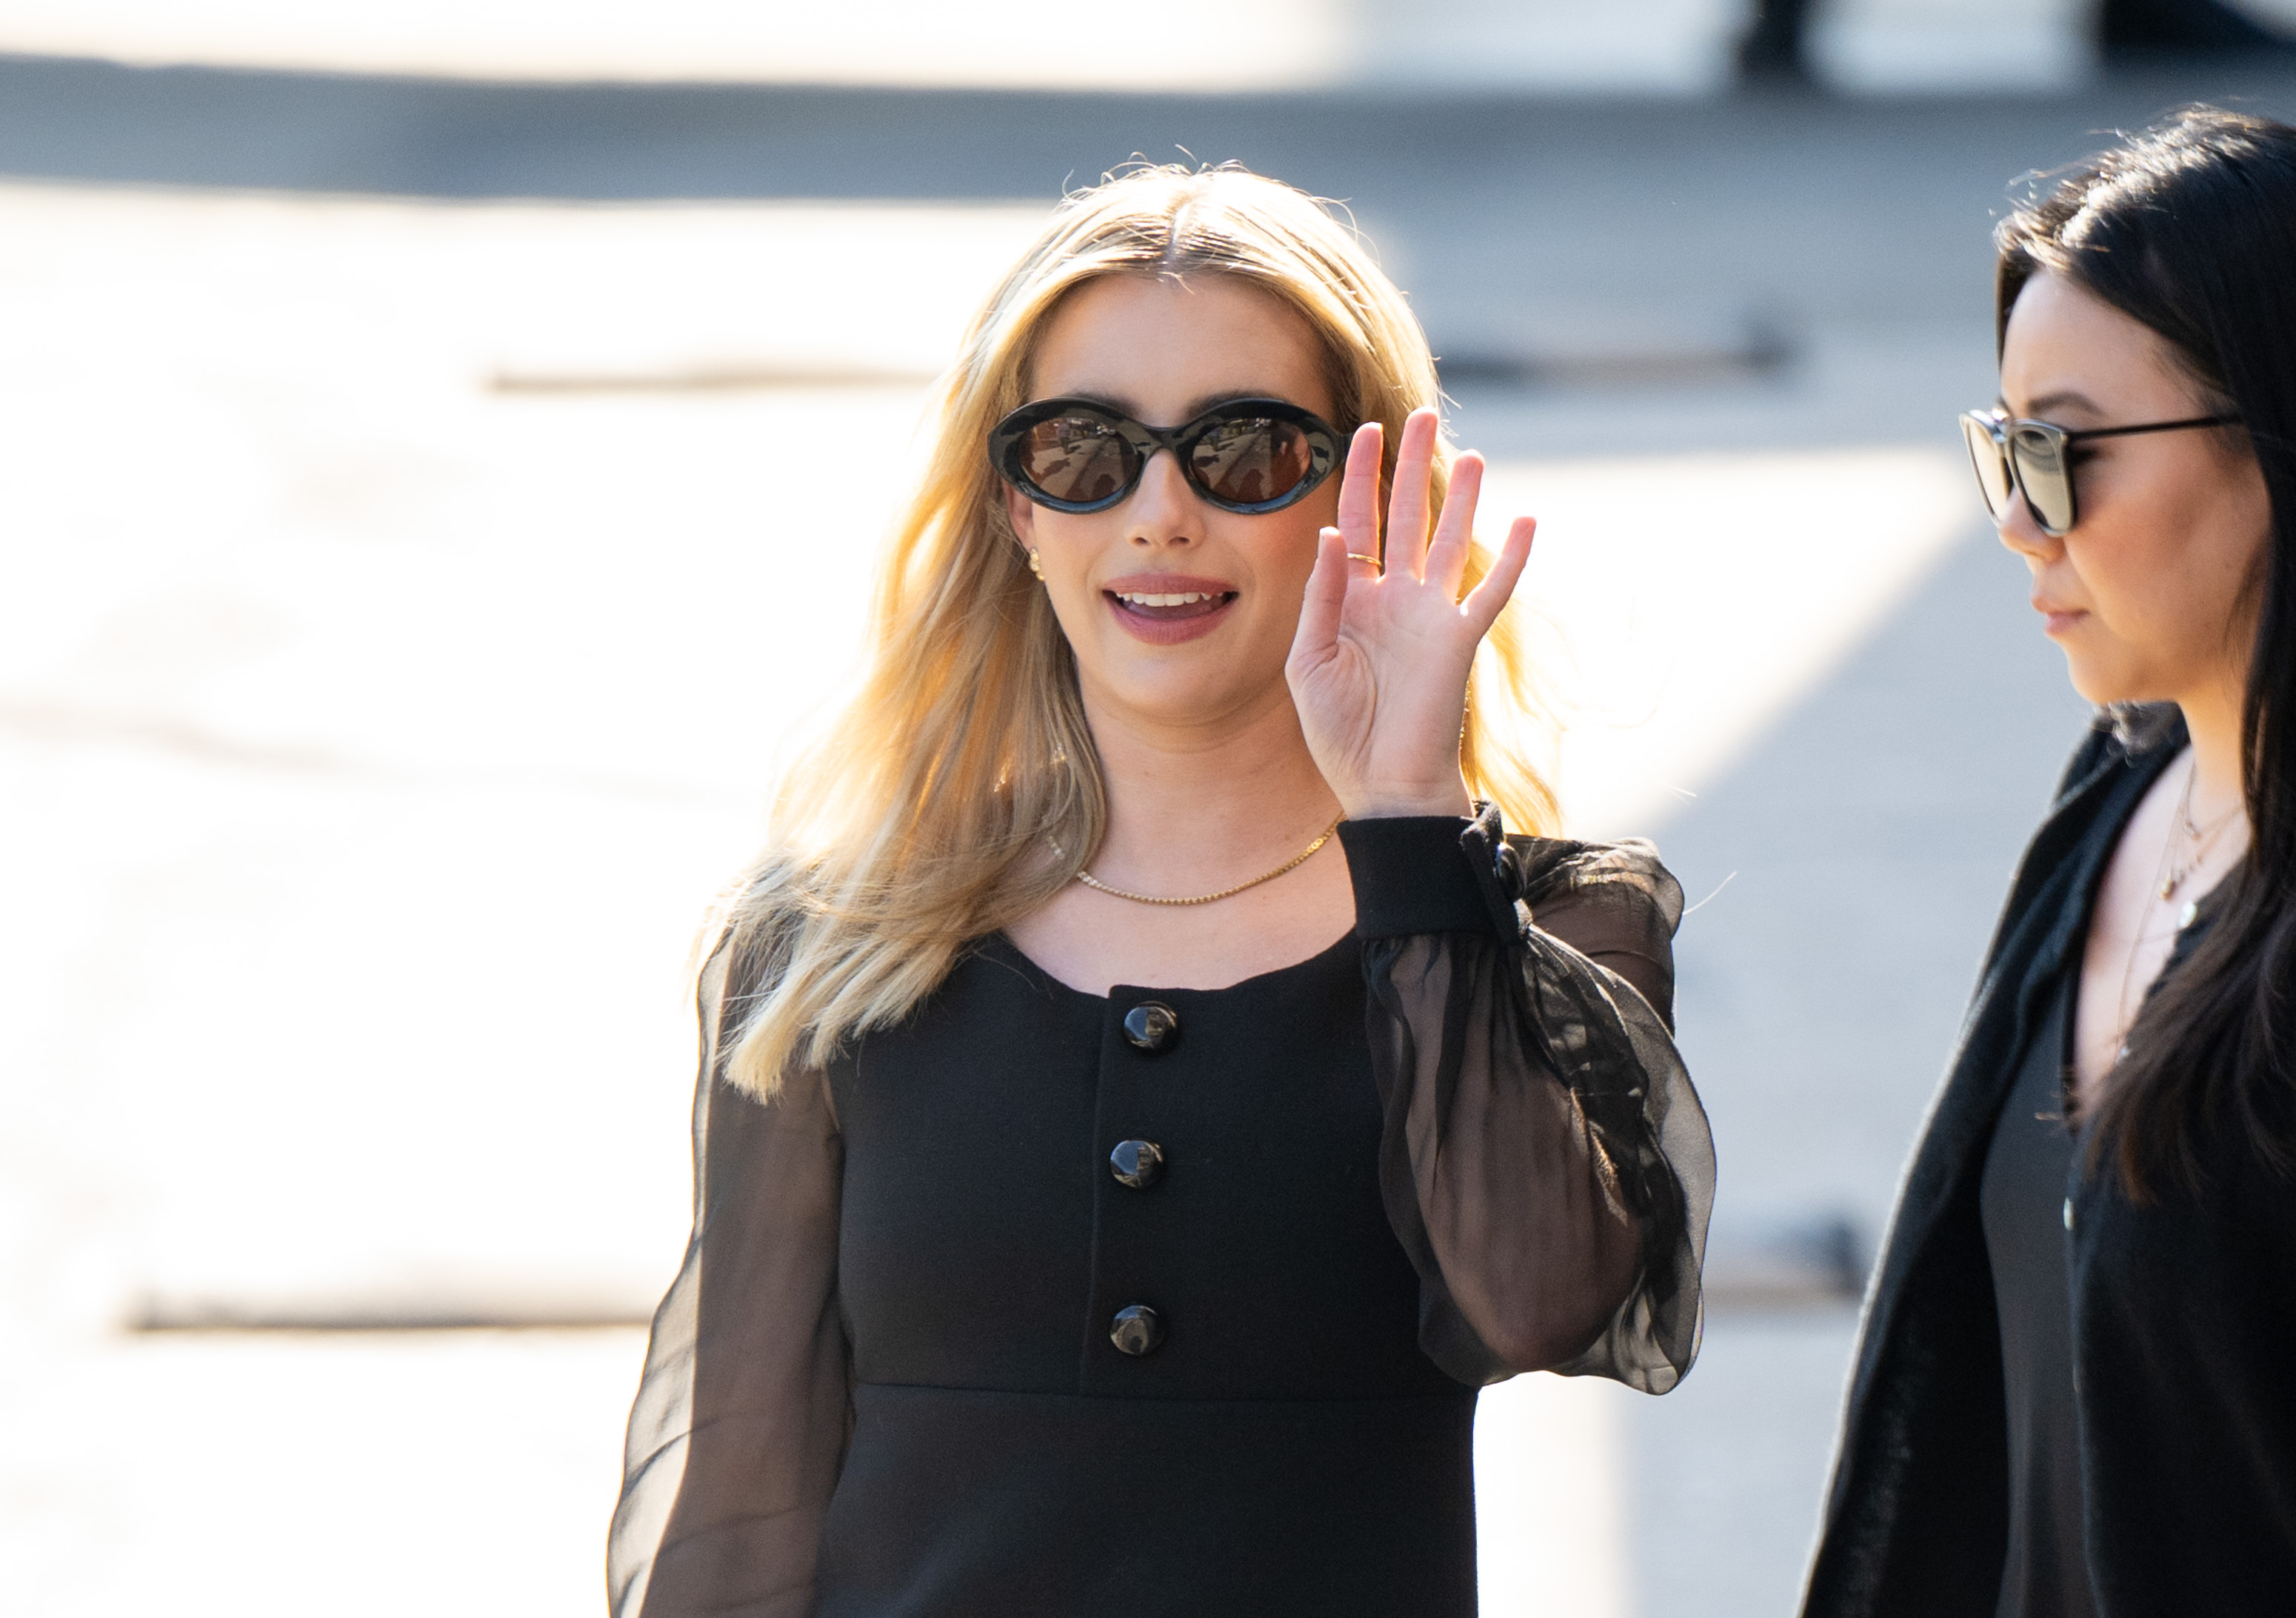 Emma Roberts engaged to actor Cody John: See her ring